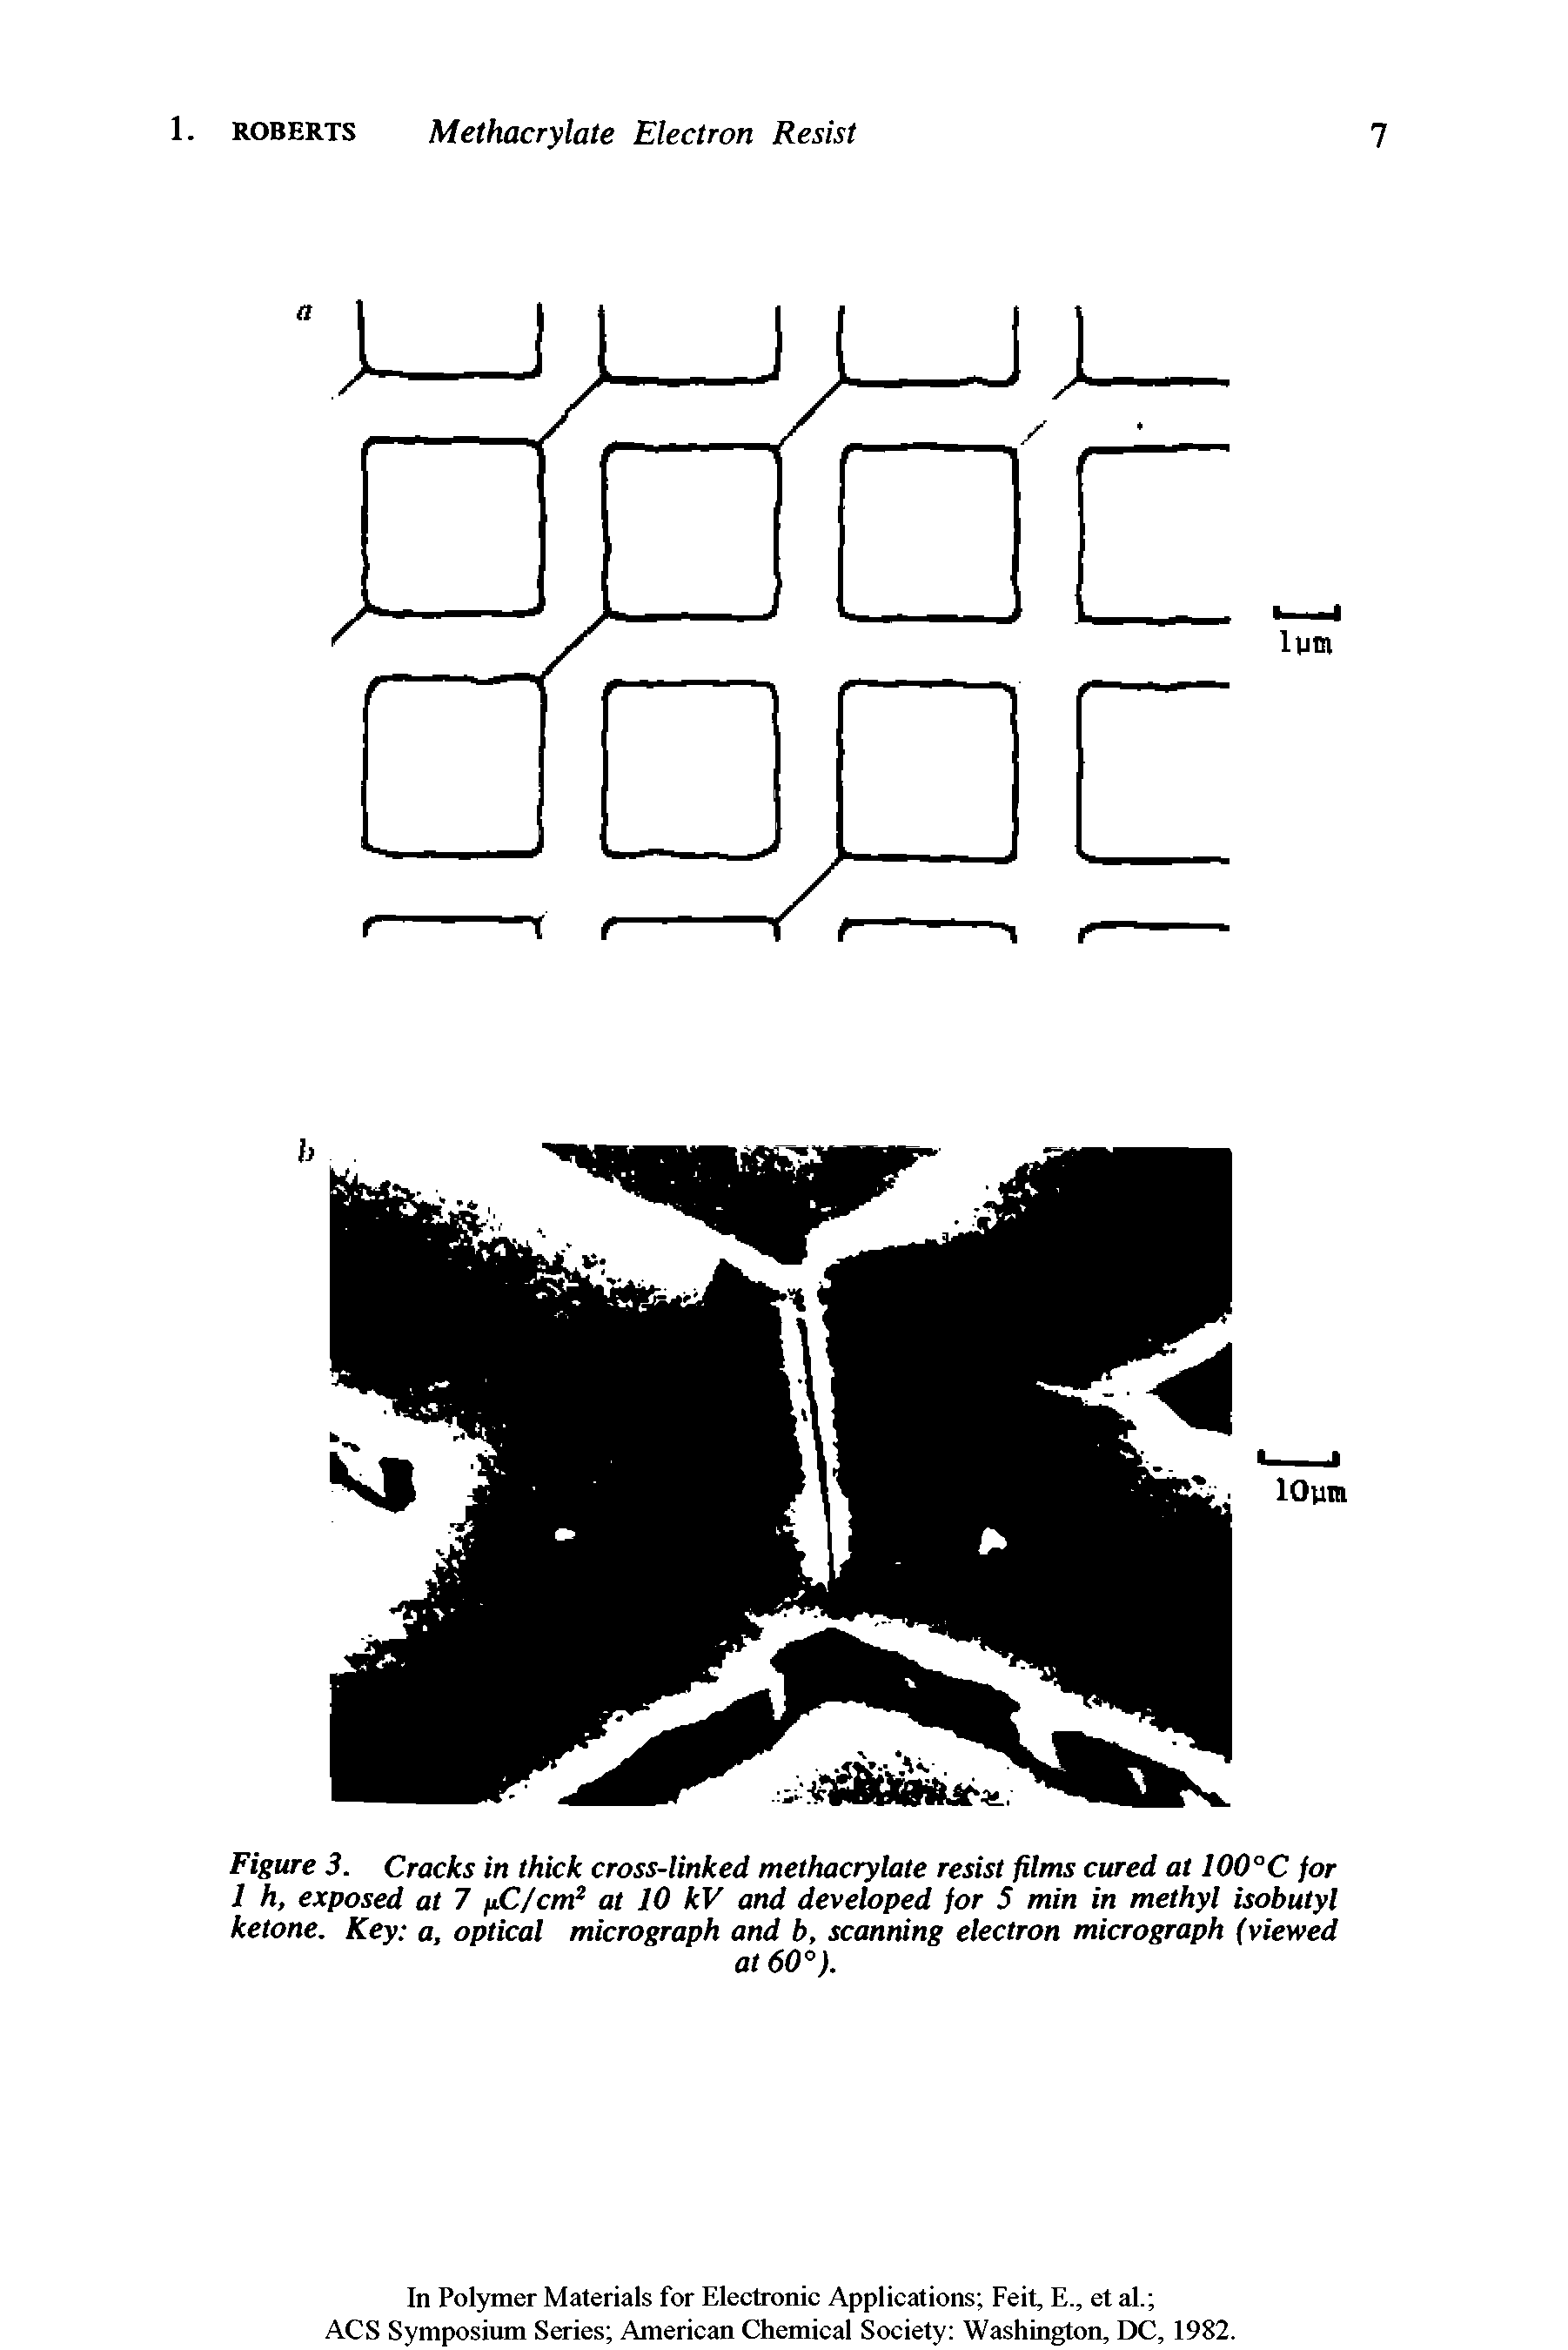 Figure 3. Cracks in thick cross-linked methacrylate resist films cured at 100°C for 1 h, exposed at 7 ixC/crn at 10 kV and developed for 5 min in methyl isobutyl ketone. Key a, optical micrograph and b, scanning electron micrograph (viewed...